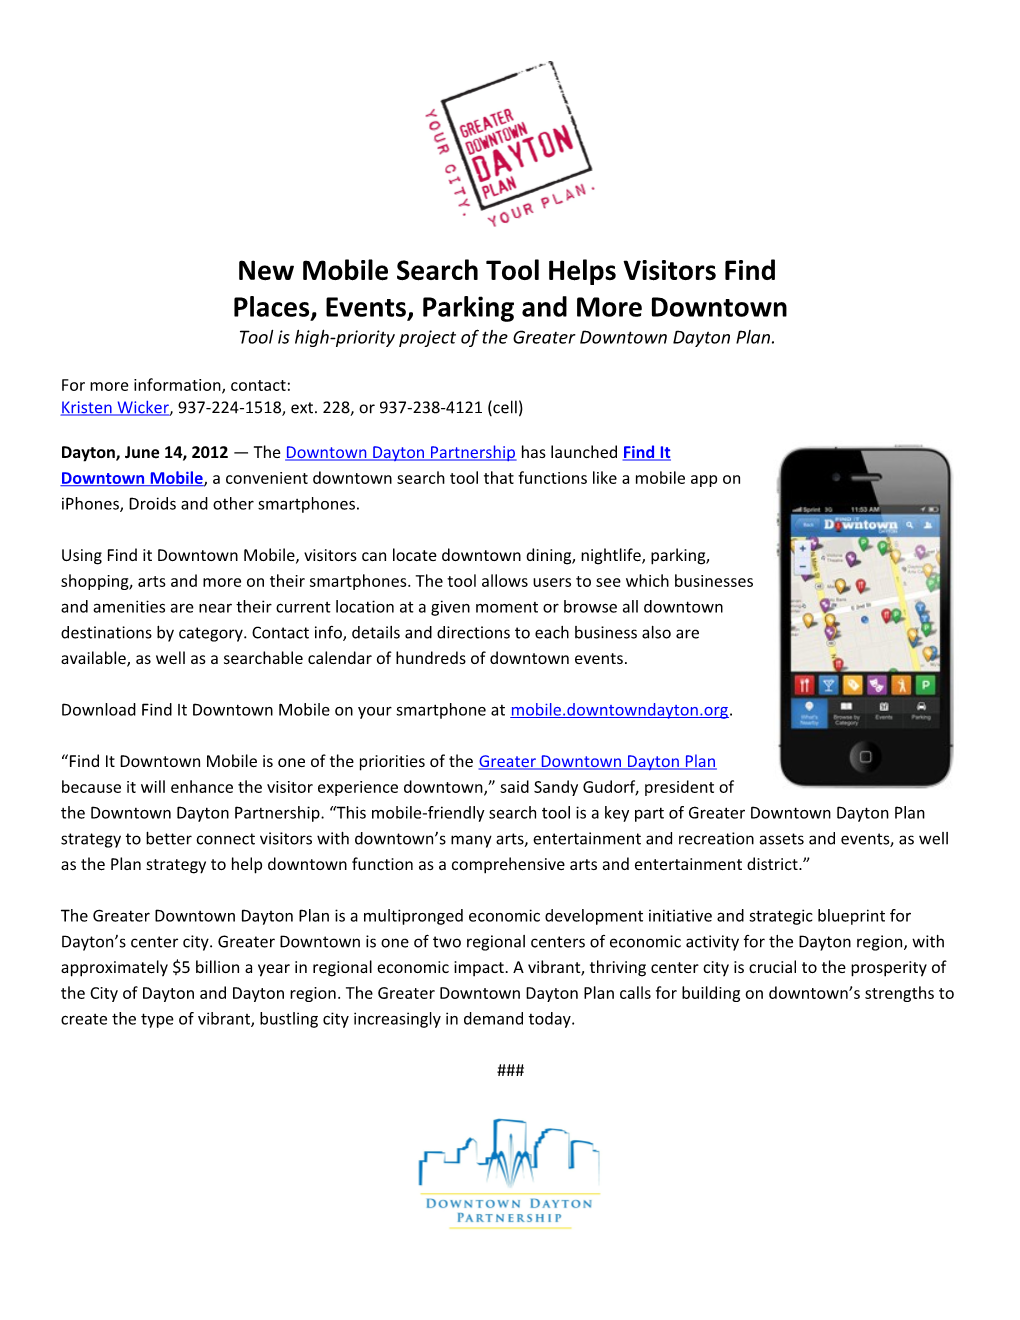 New Mobile Search Tool Helps Visitors Find